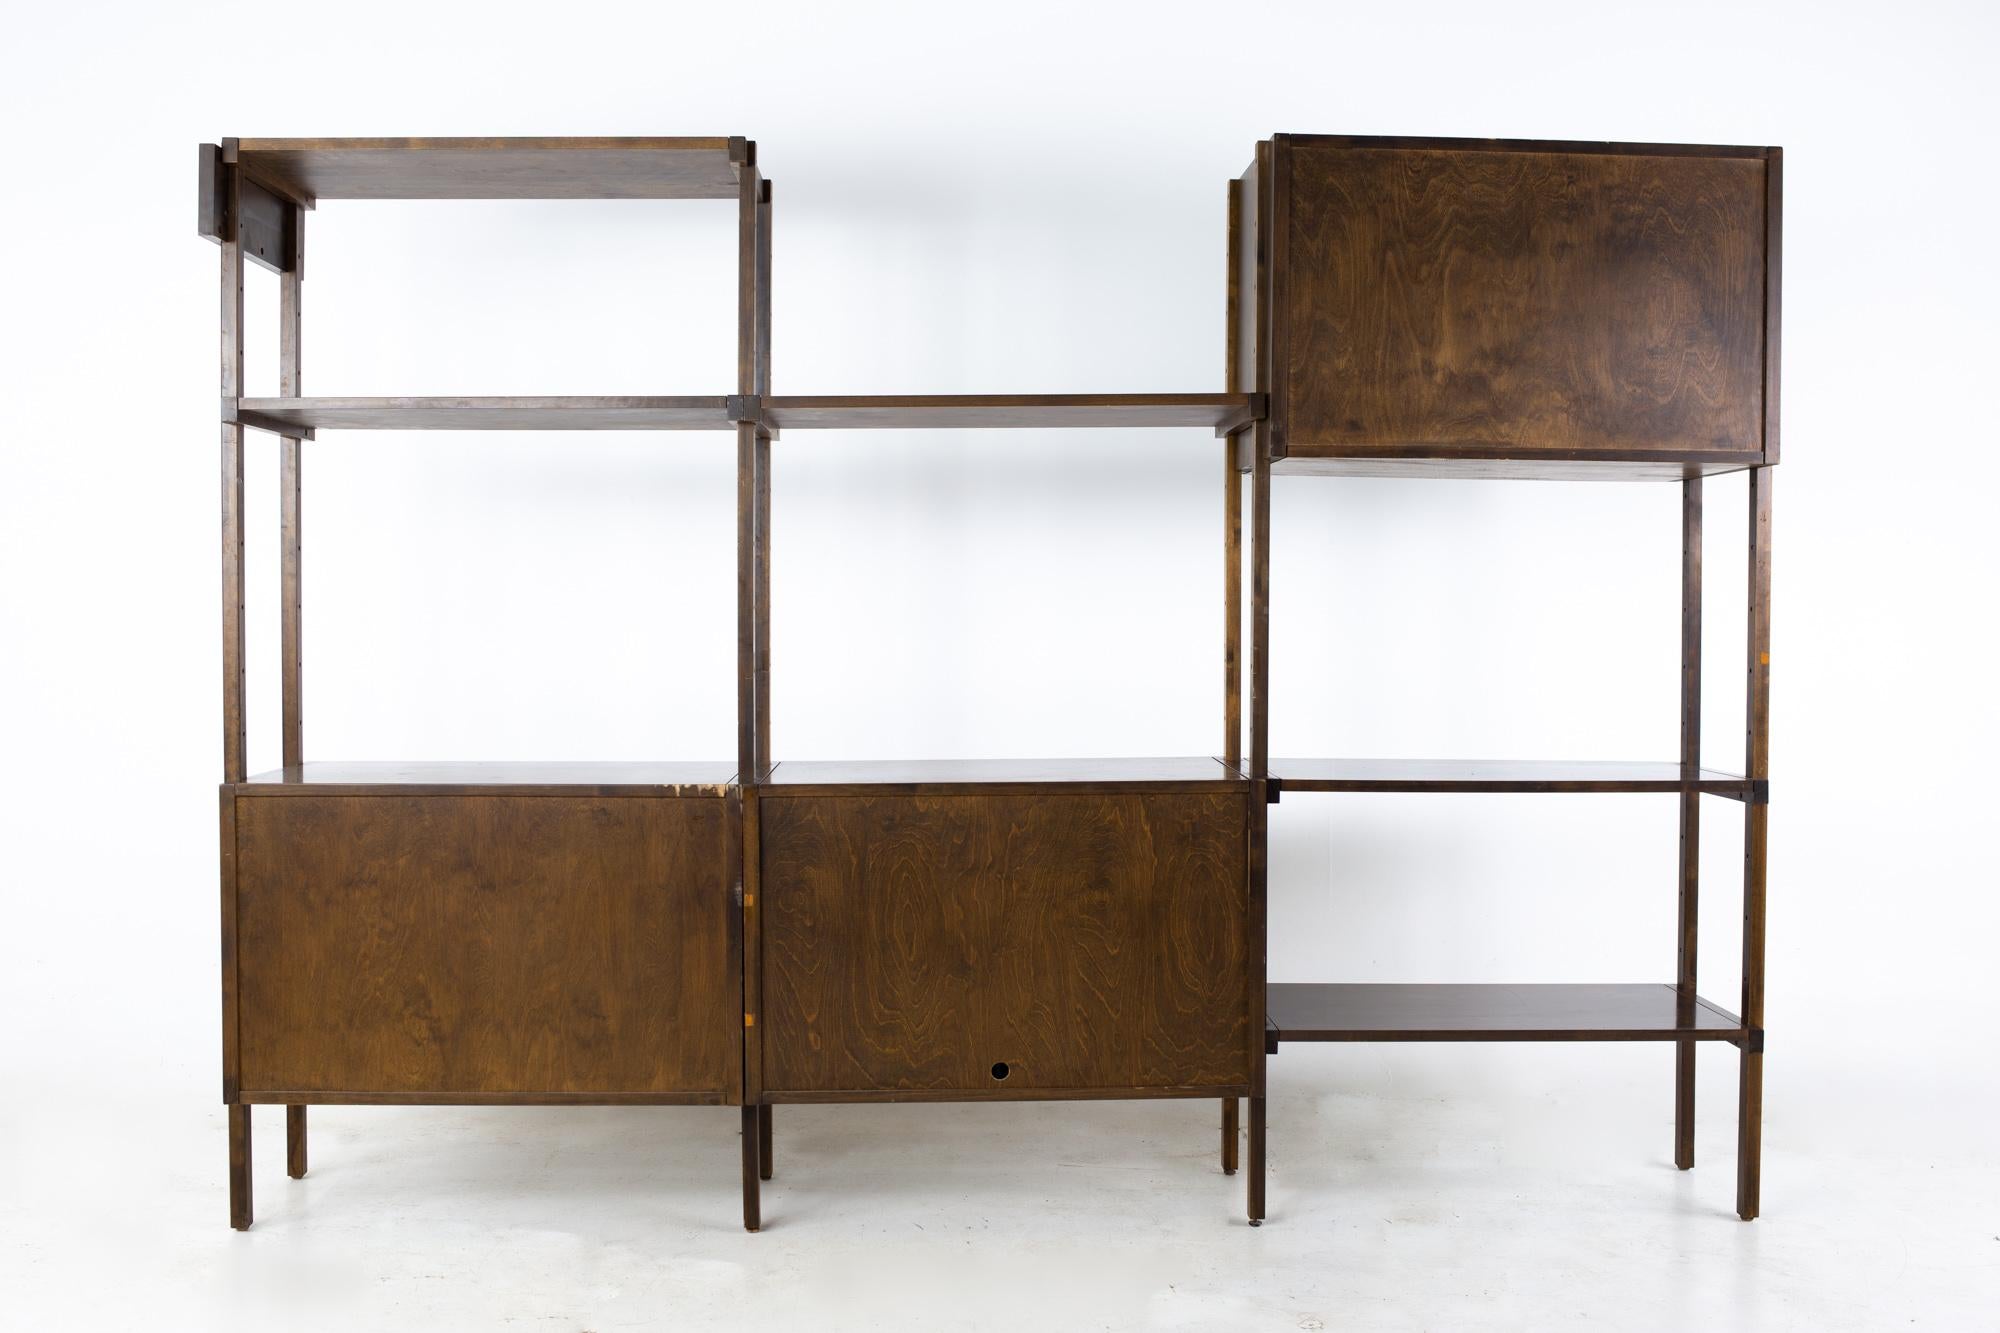 Mid Century Yugoslavian walnut 3 bay wall unit

The wall unit measures: 98.25 wide x 18 deep x 69 inches high

All pieces of furniture can be had in what we call restored vintage condition. That means the piece is restored upon purchase so it’s